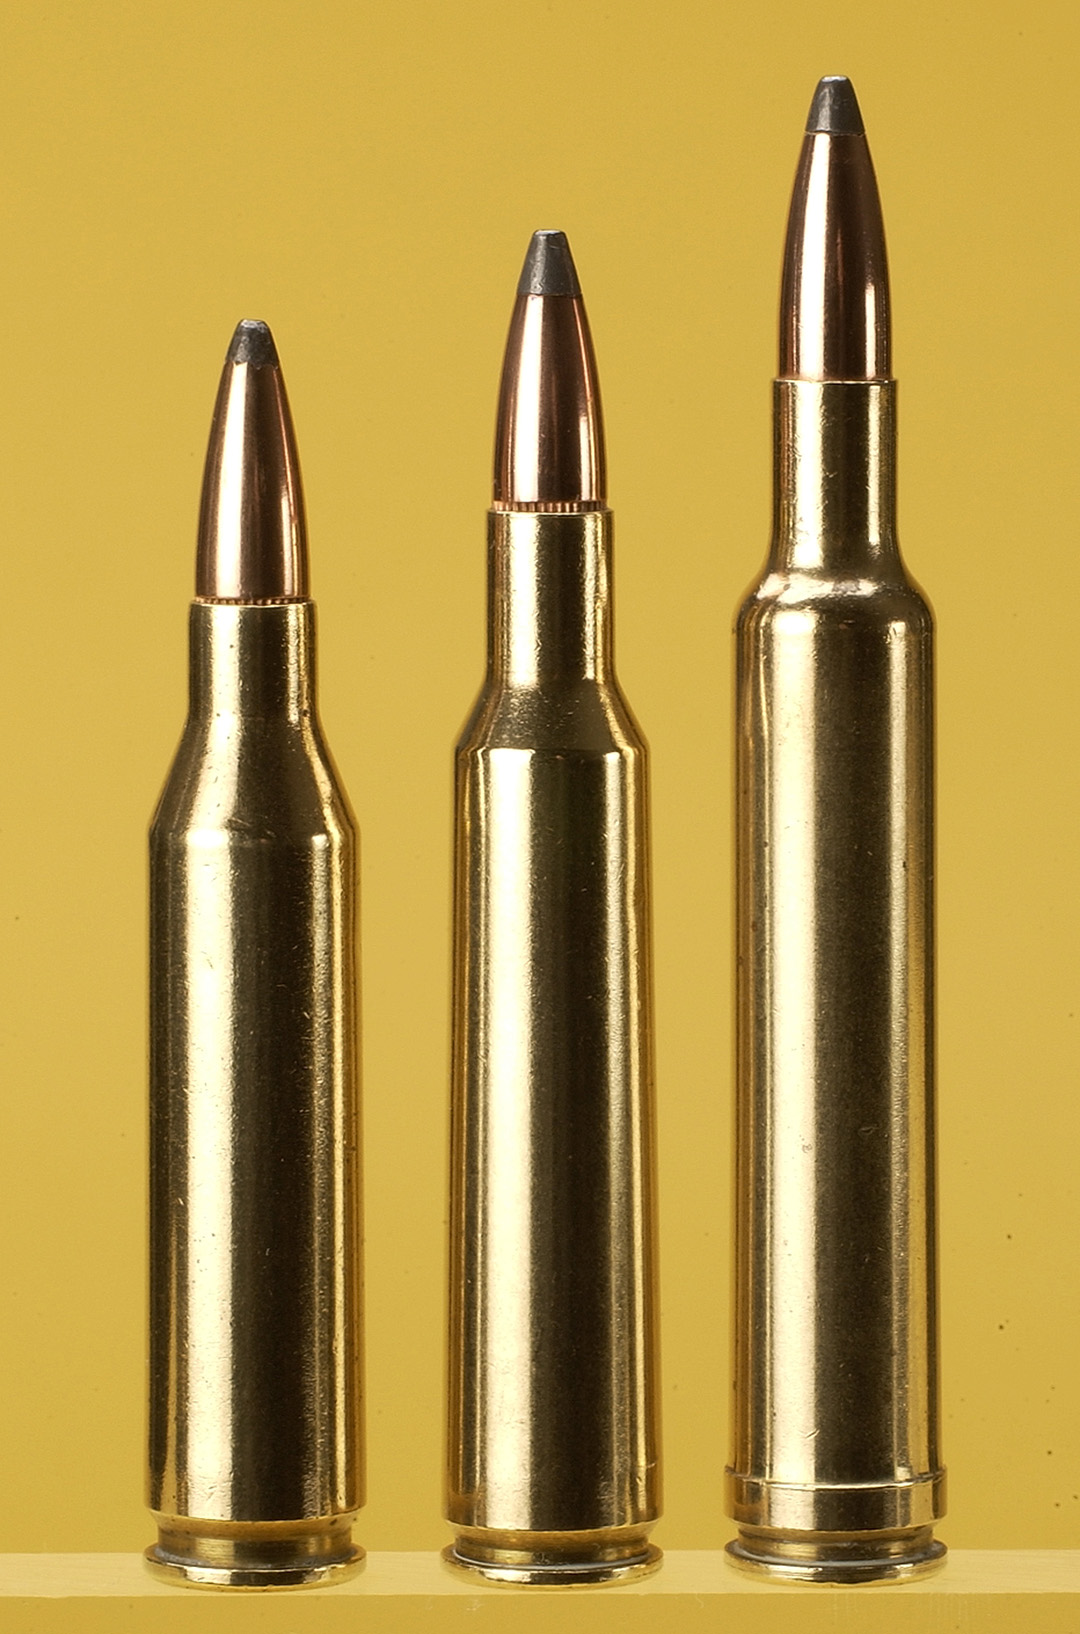 The six-millimeter cartridges are popular today for hunting and here we have the .243 Winchester, 6mm Remington and the .240 Weatherby Magnum.